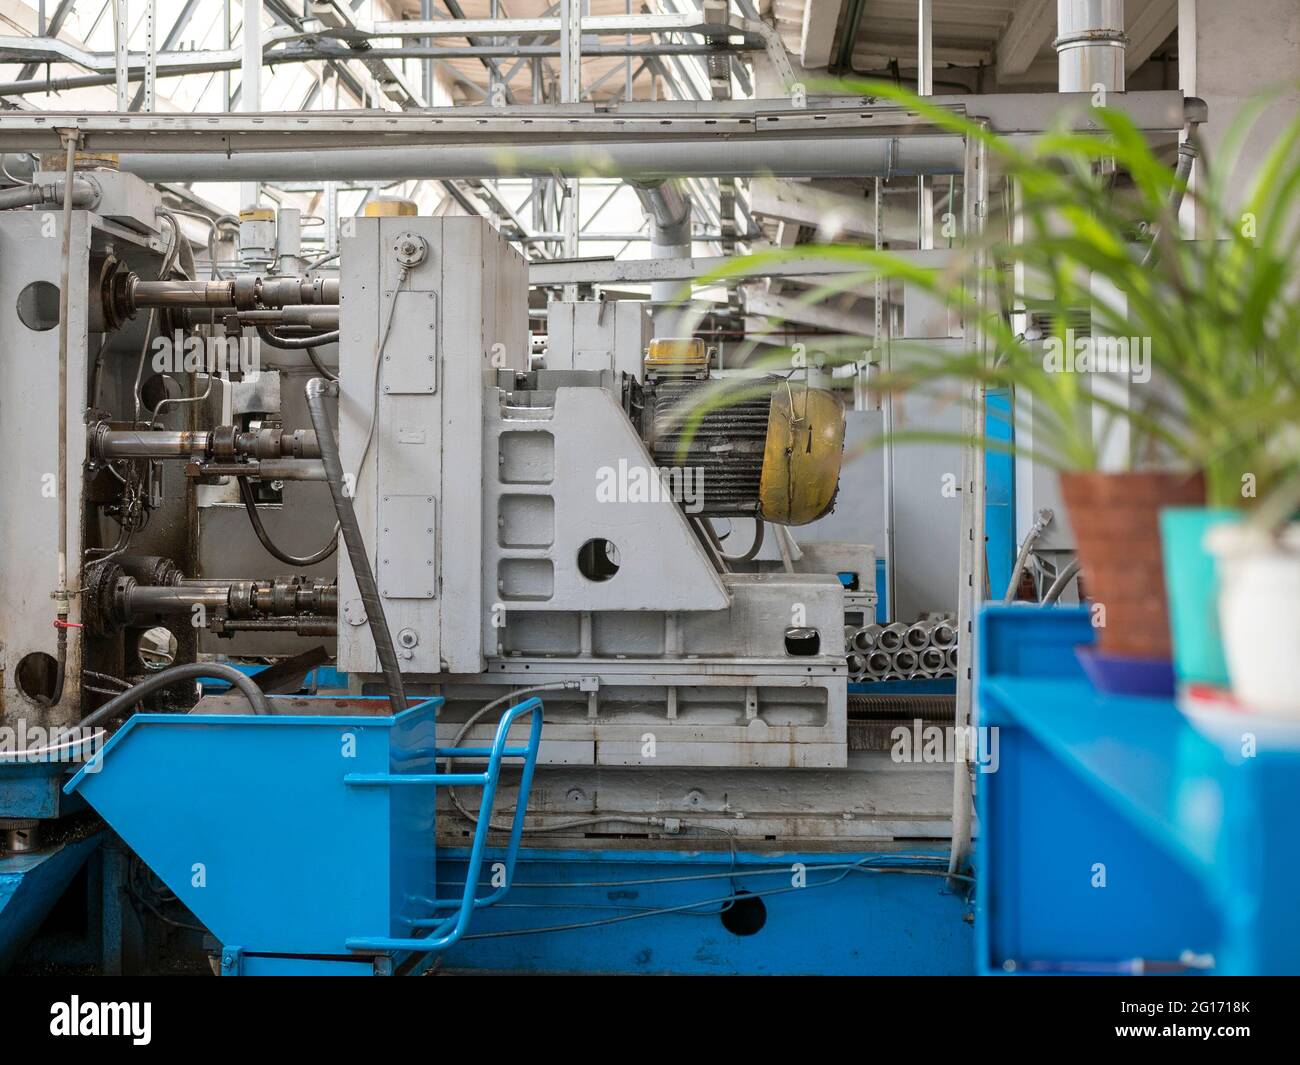 View of the shop for the production of machine parts with old equipment and pot plants. Production hall Stock Photo